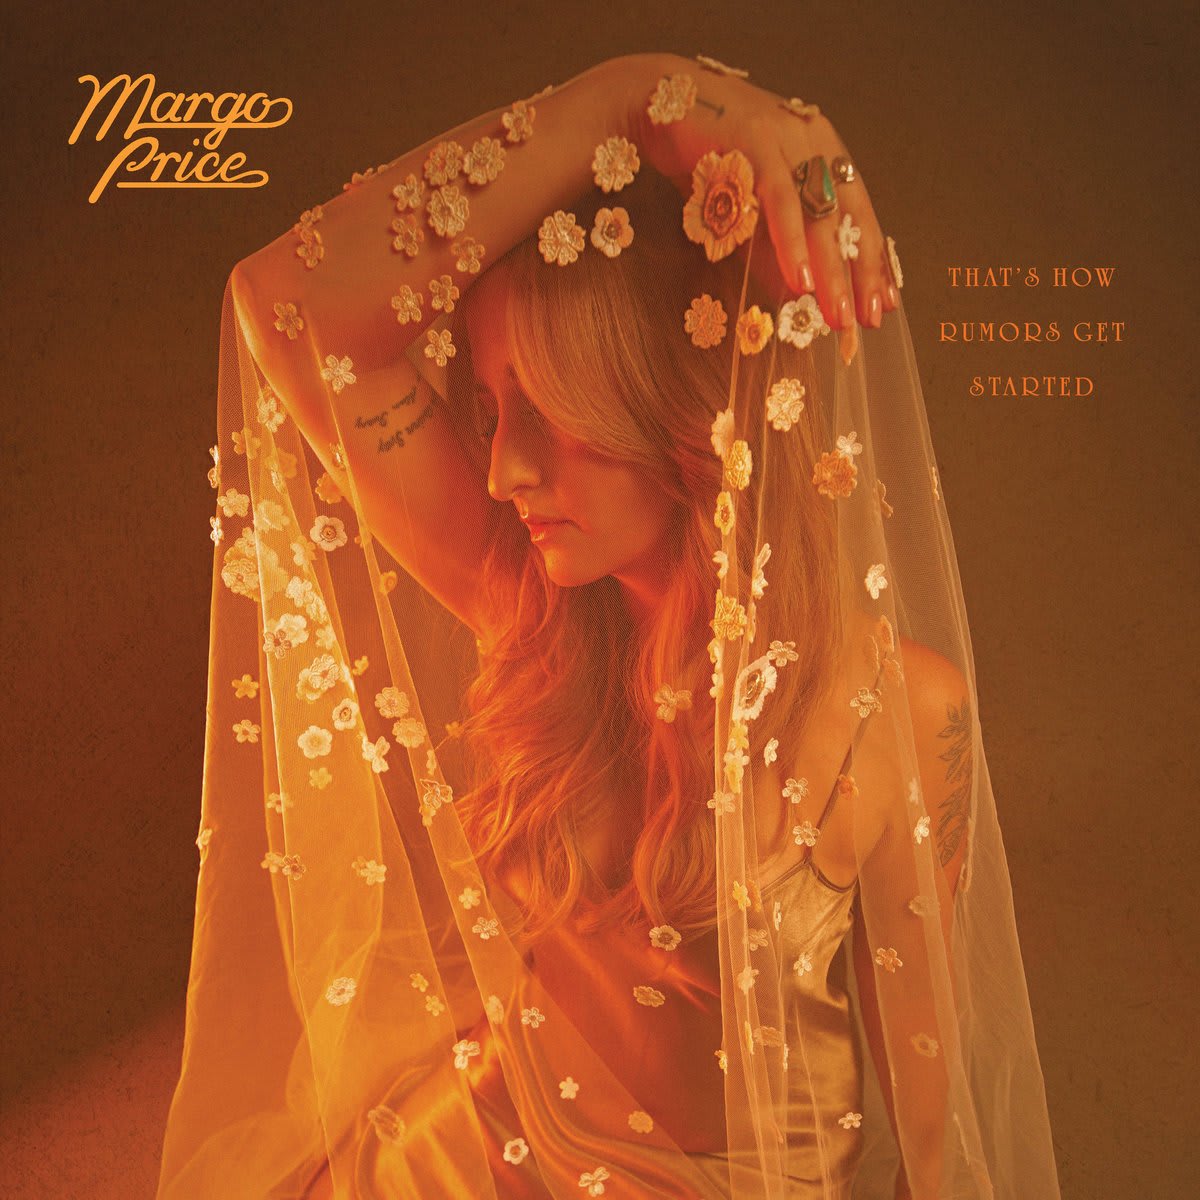 Album Review: Margo Price - That's How Rumors Get Started -